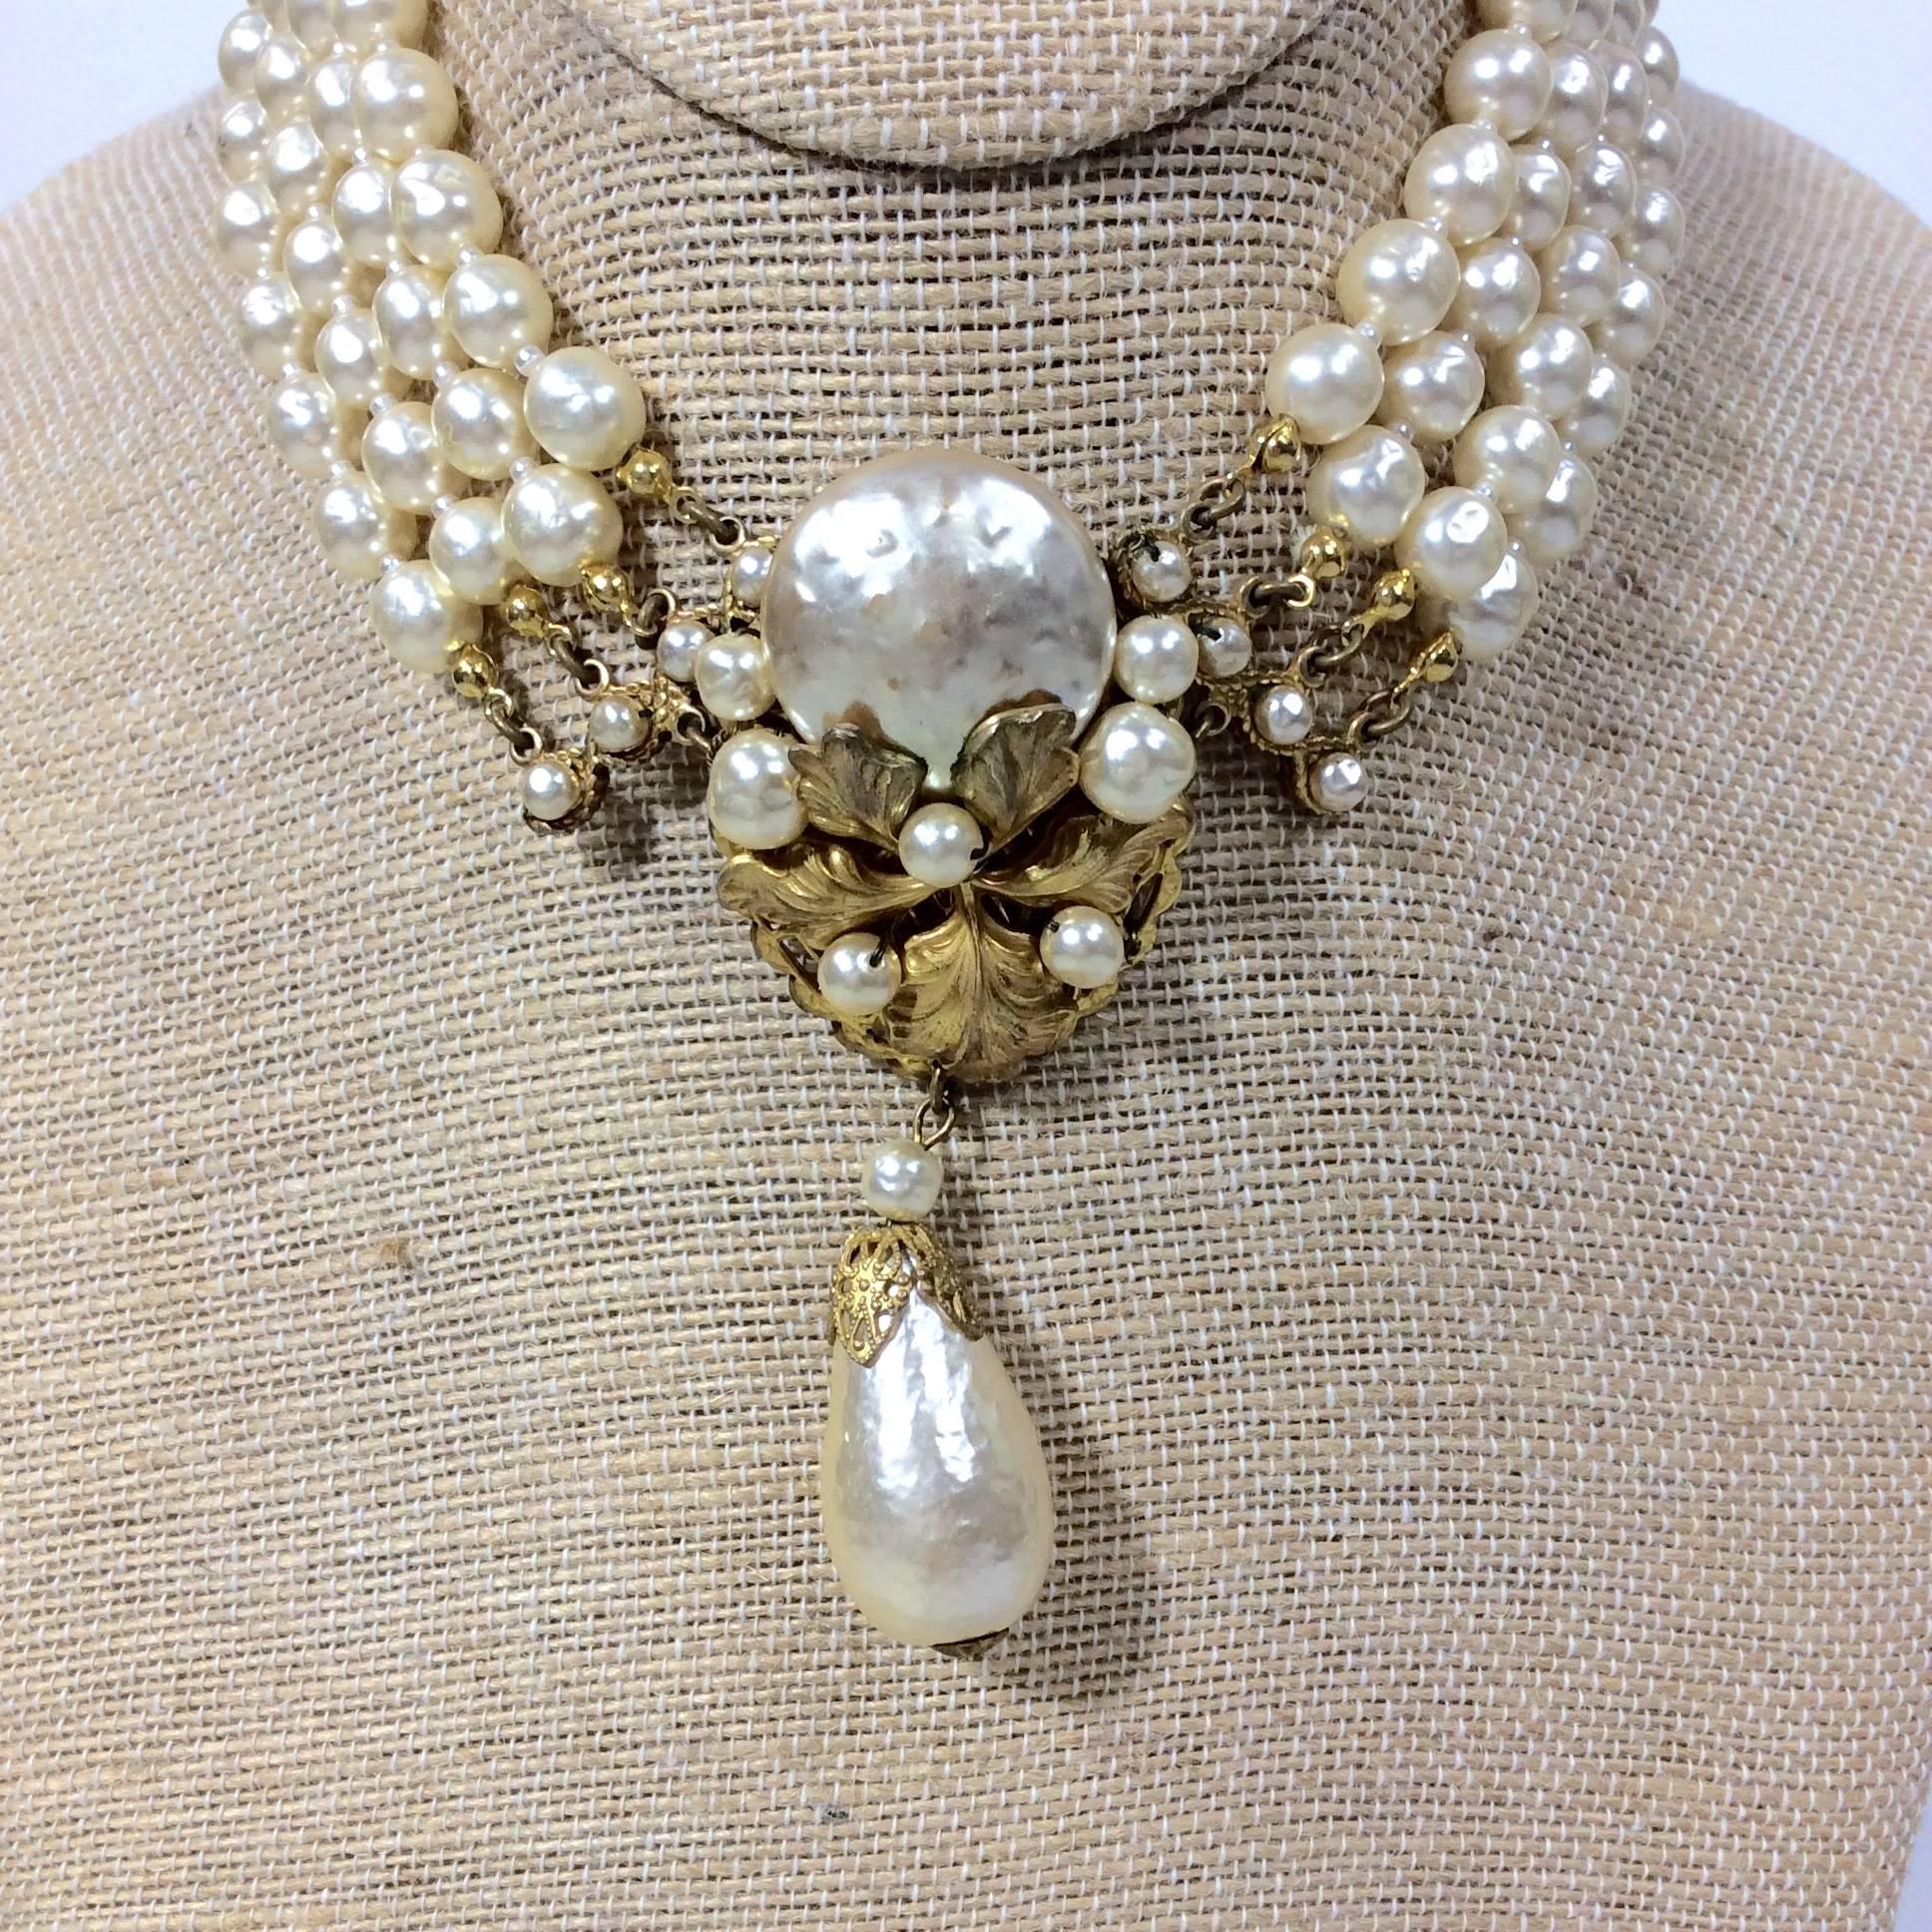 Miriam Haskell 4 Strand Pearl Choker and Earring Set. The choker is 16